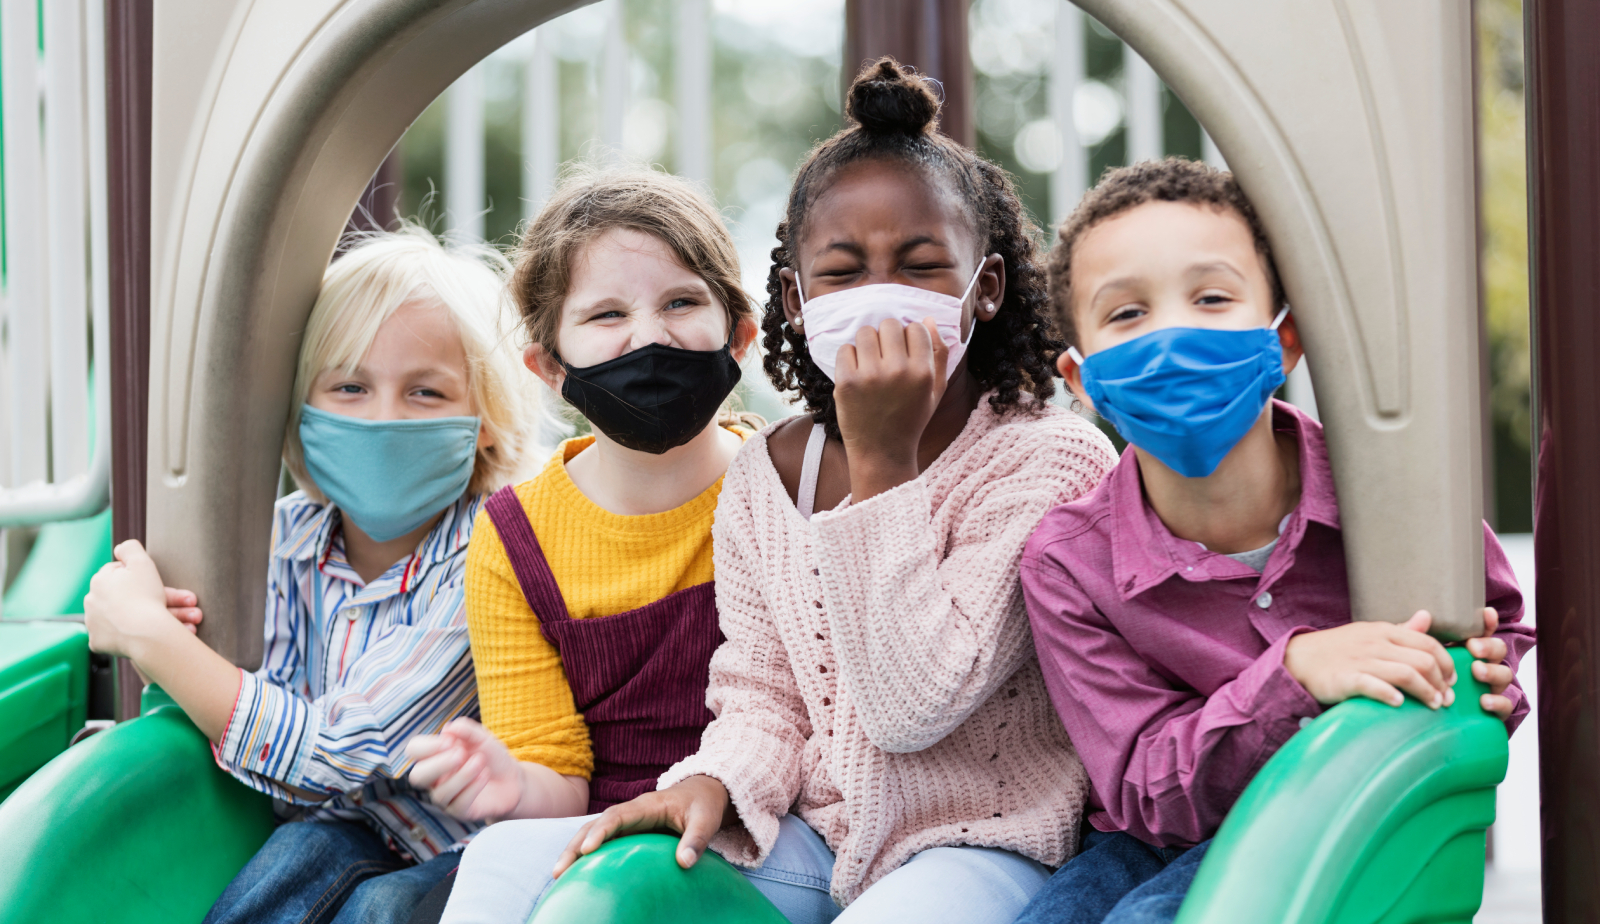 Vanderbilt’s IRIS Center provides broad access to educational resources, support during pandemic